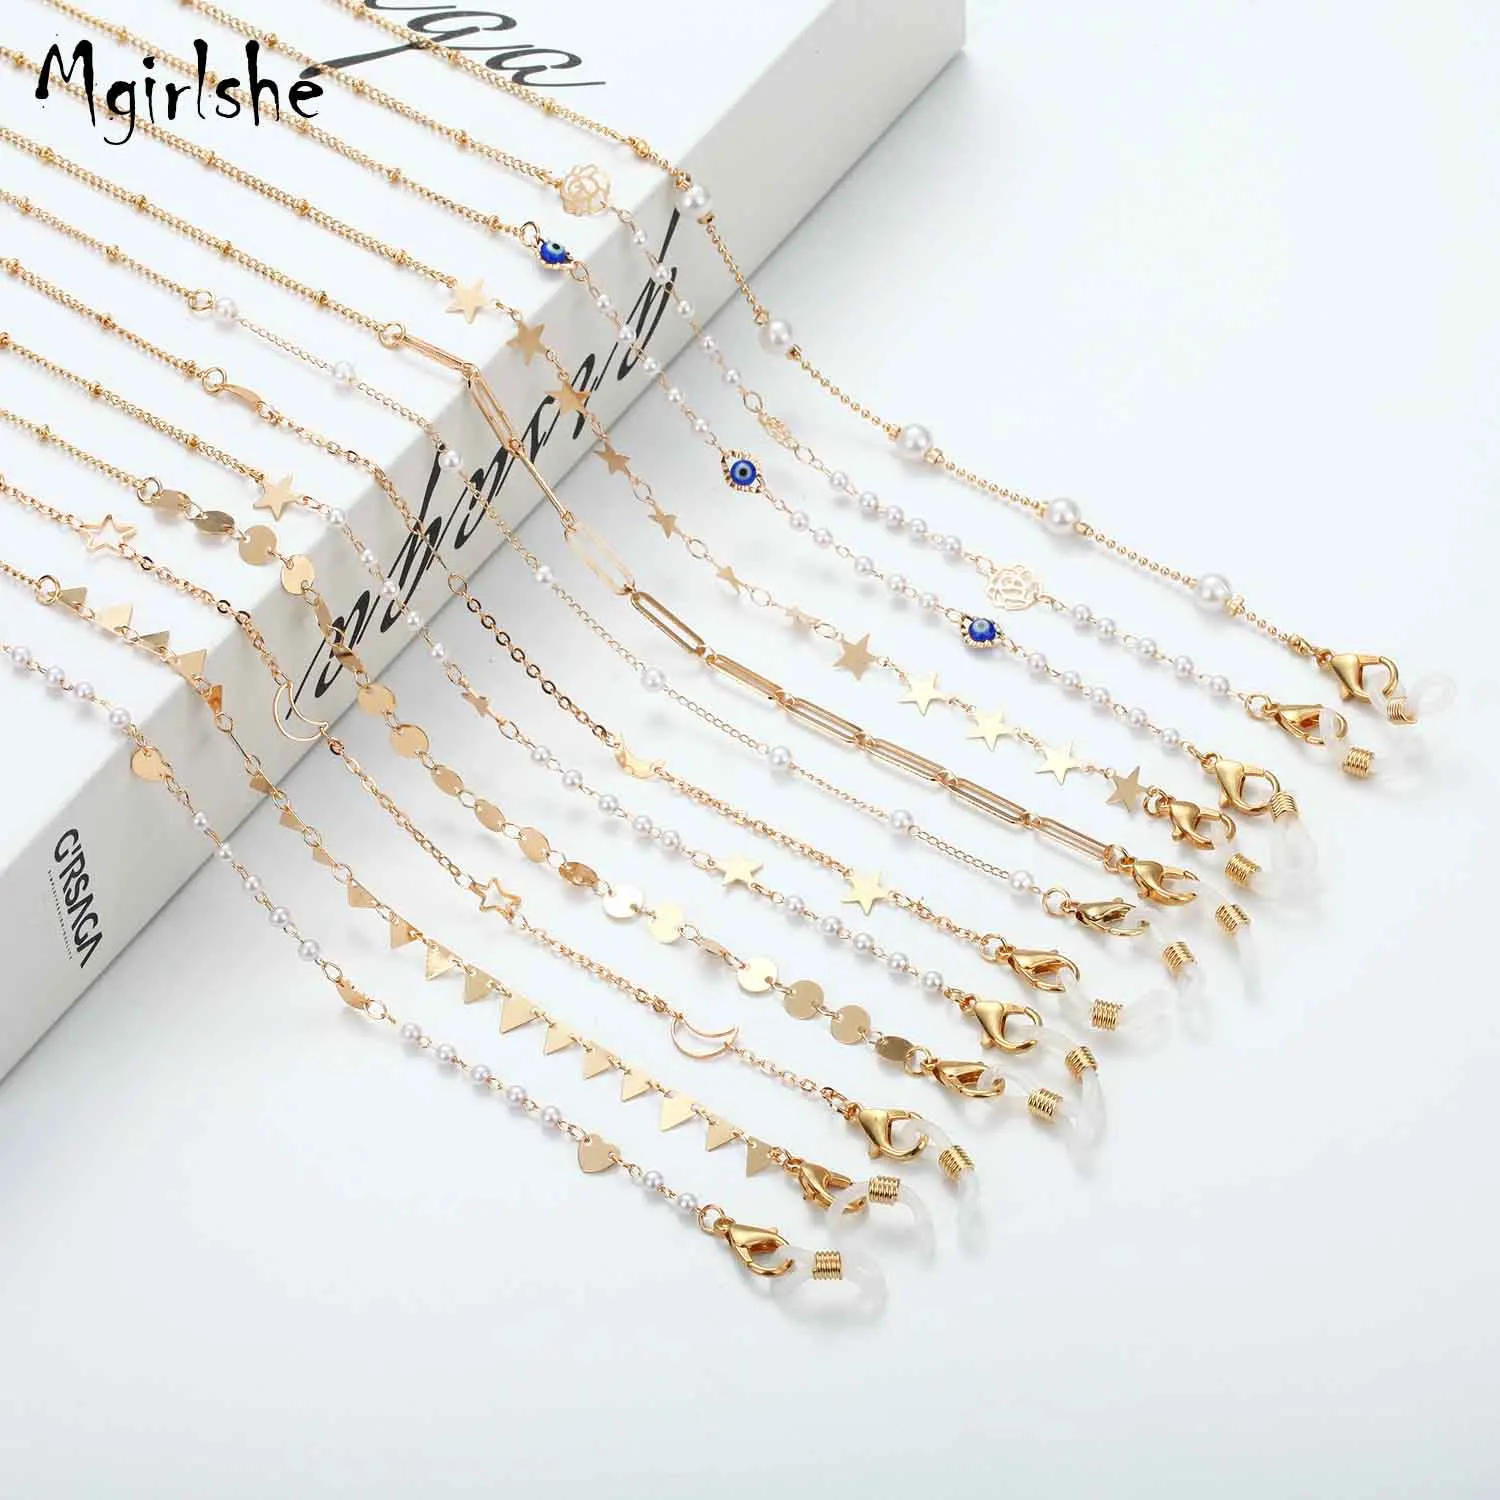 

Mgirlshe Wholesale Gold Cool Masking Lanyard Chain Holder Gold Stars Roses Pearl Fashion Glasses Chains Anti-lost Holder Chains